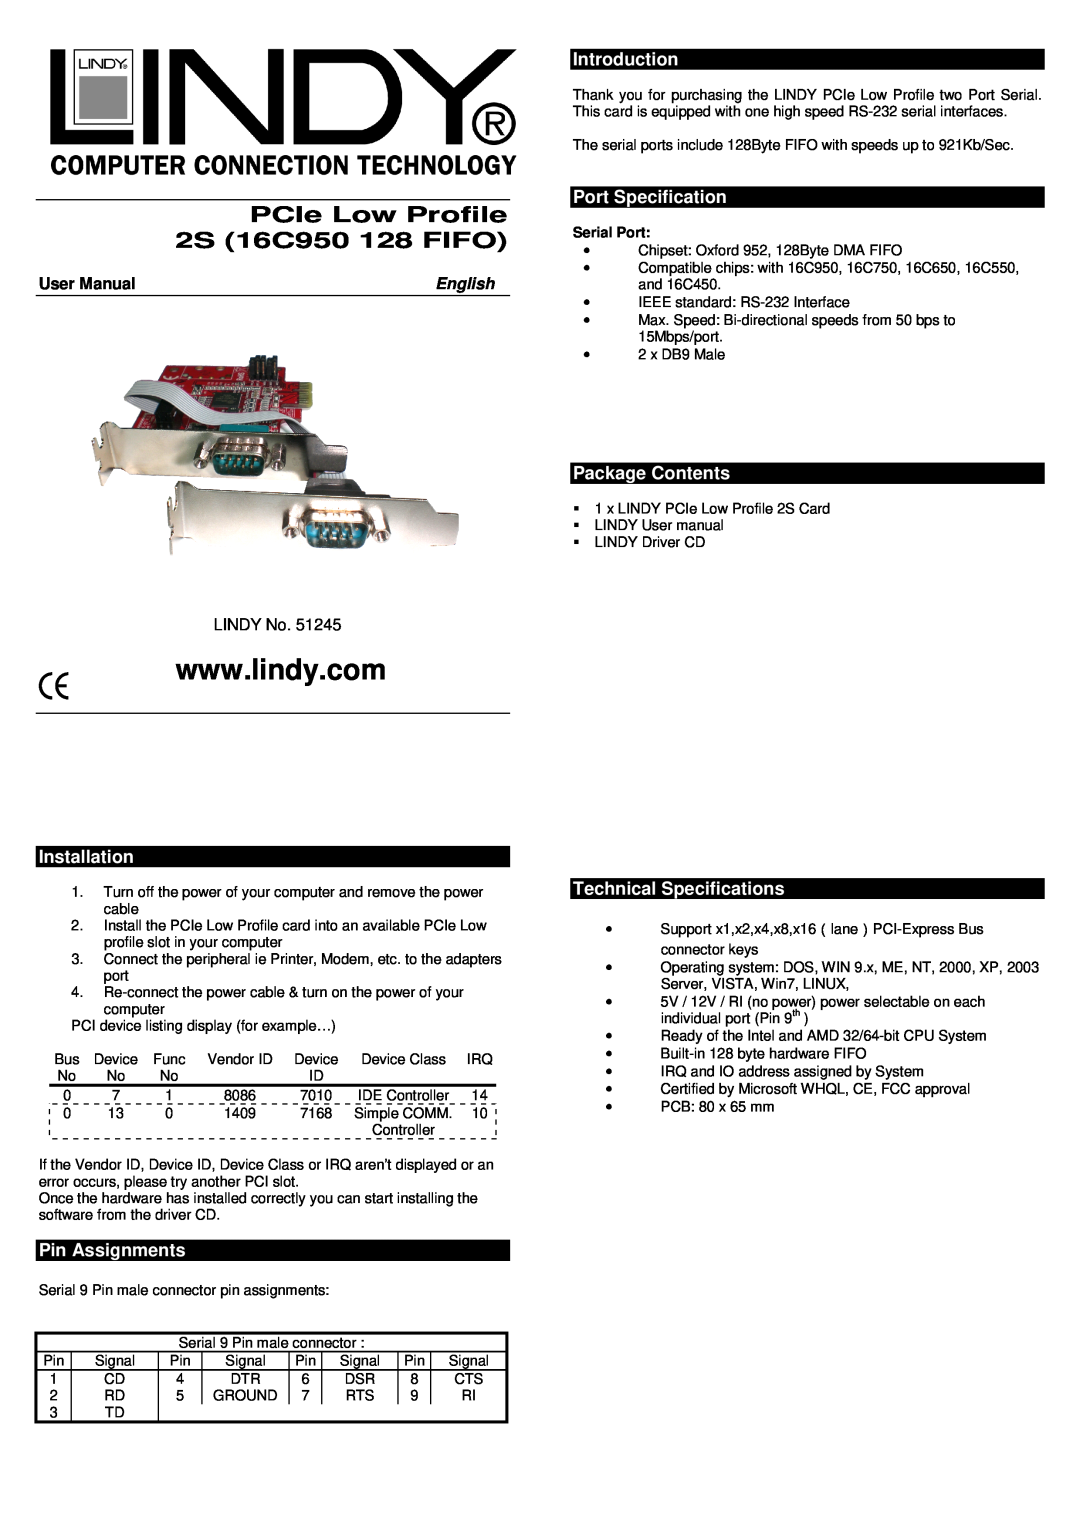 Lindy 51245 technical specifications Introduction, Port Specification, Installation, Pin Assignments, Package Contents 